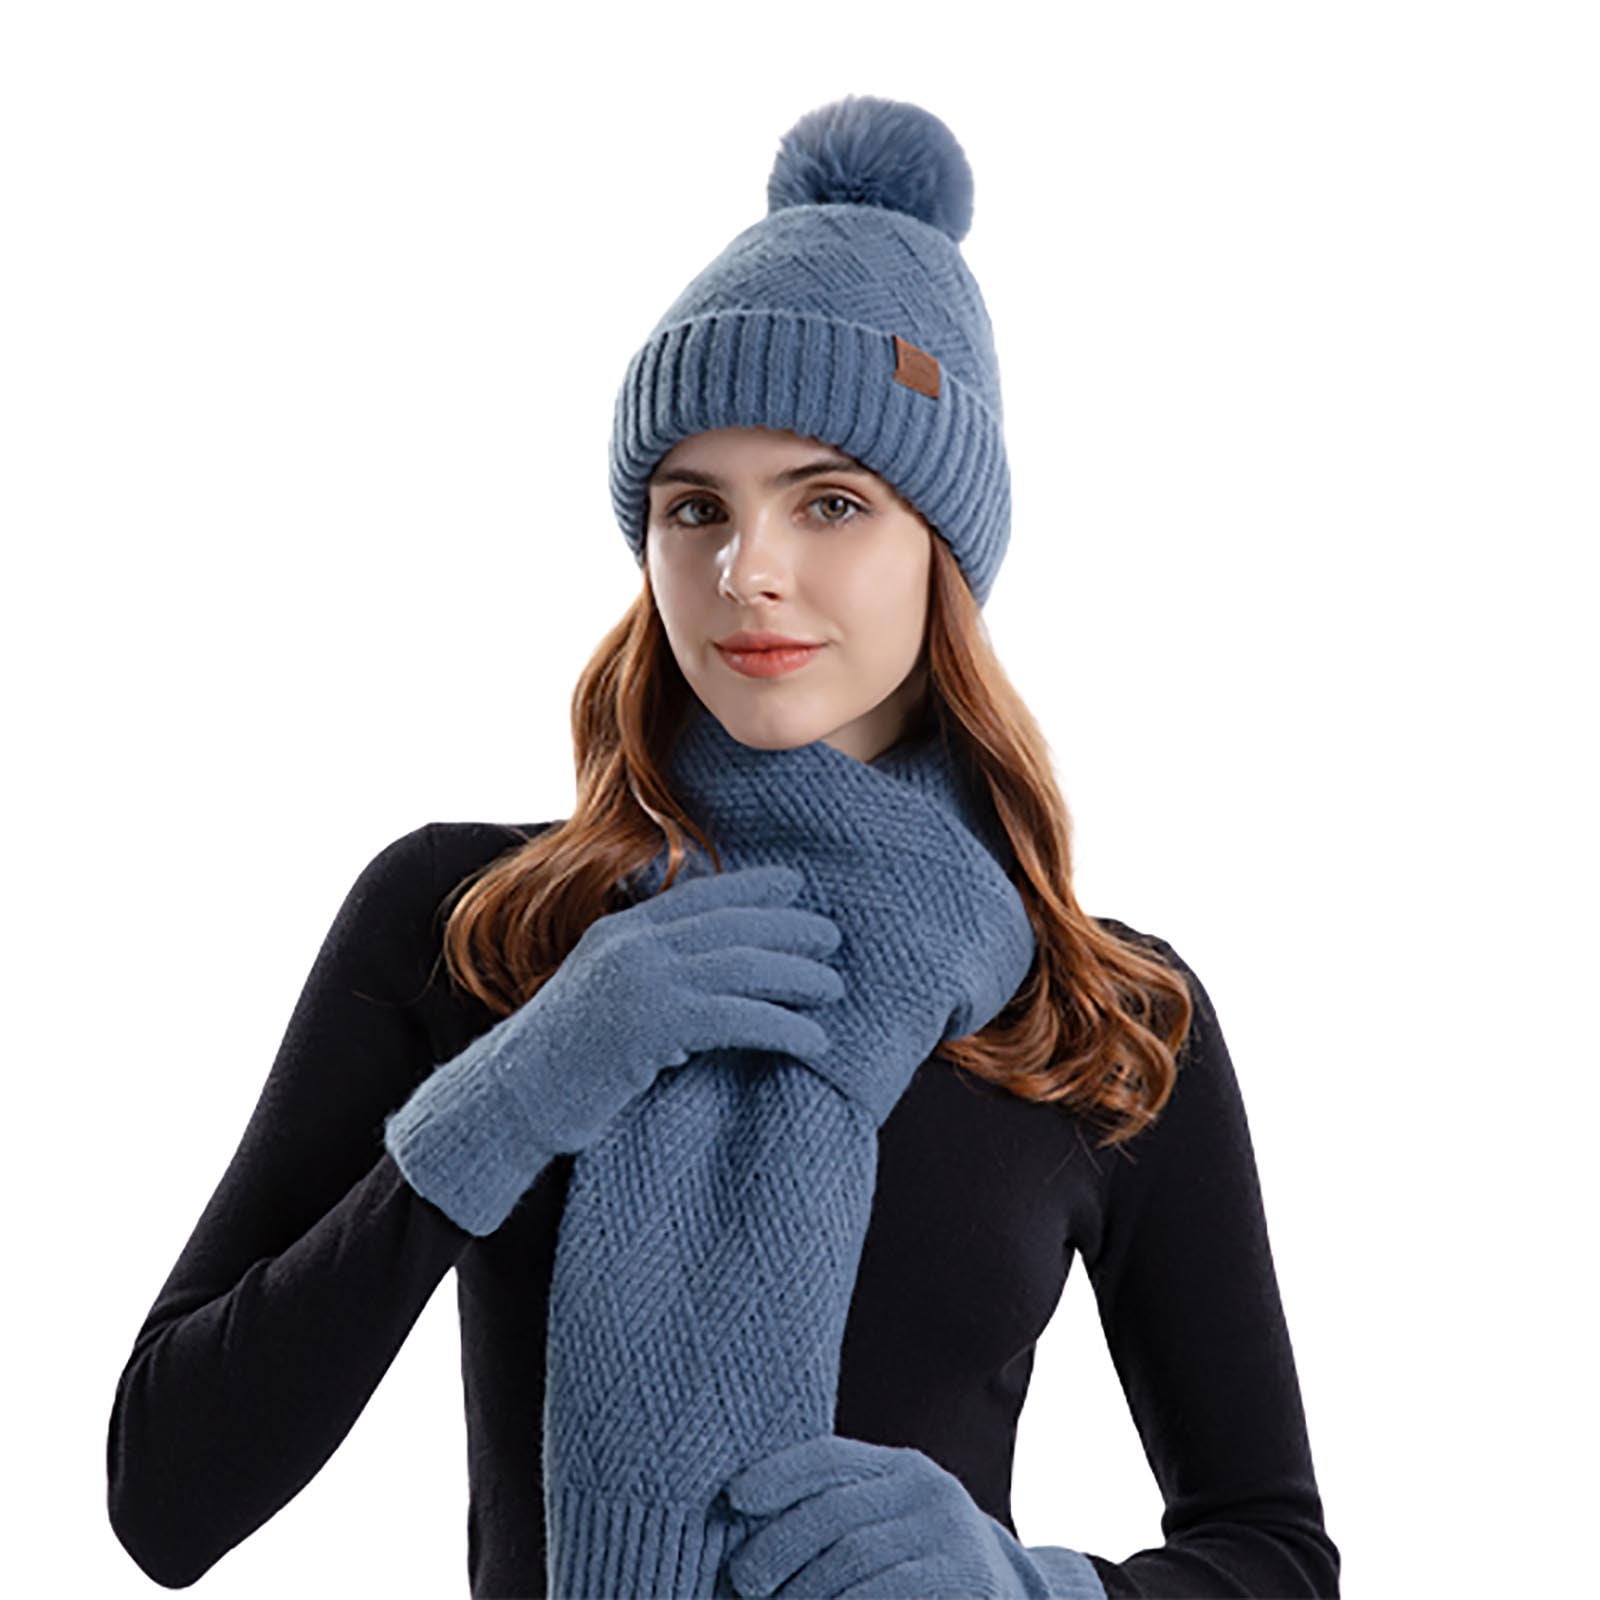 Hats and Gloves - Women